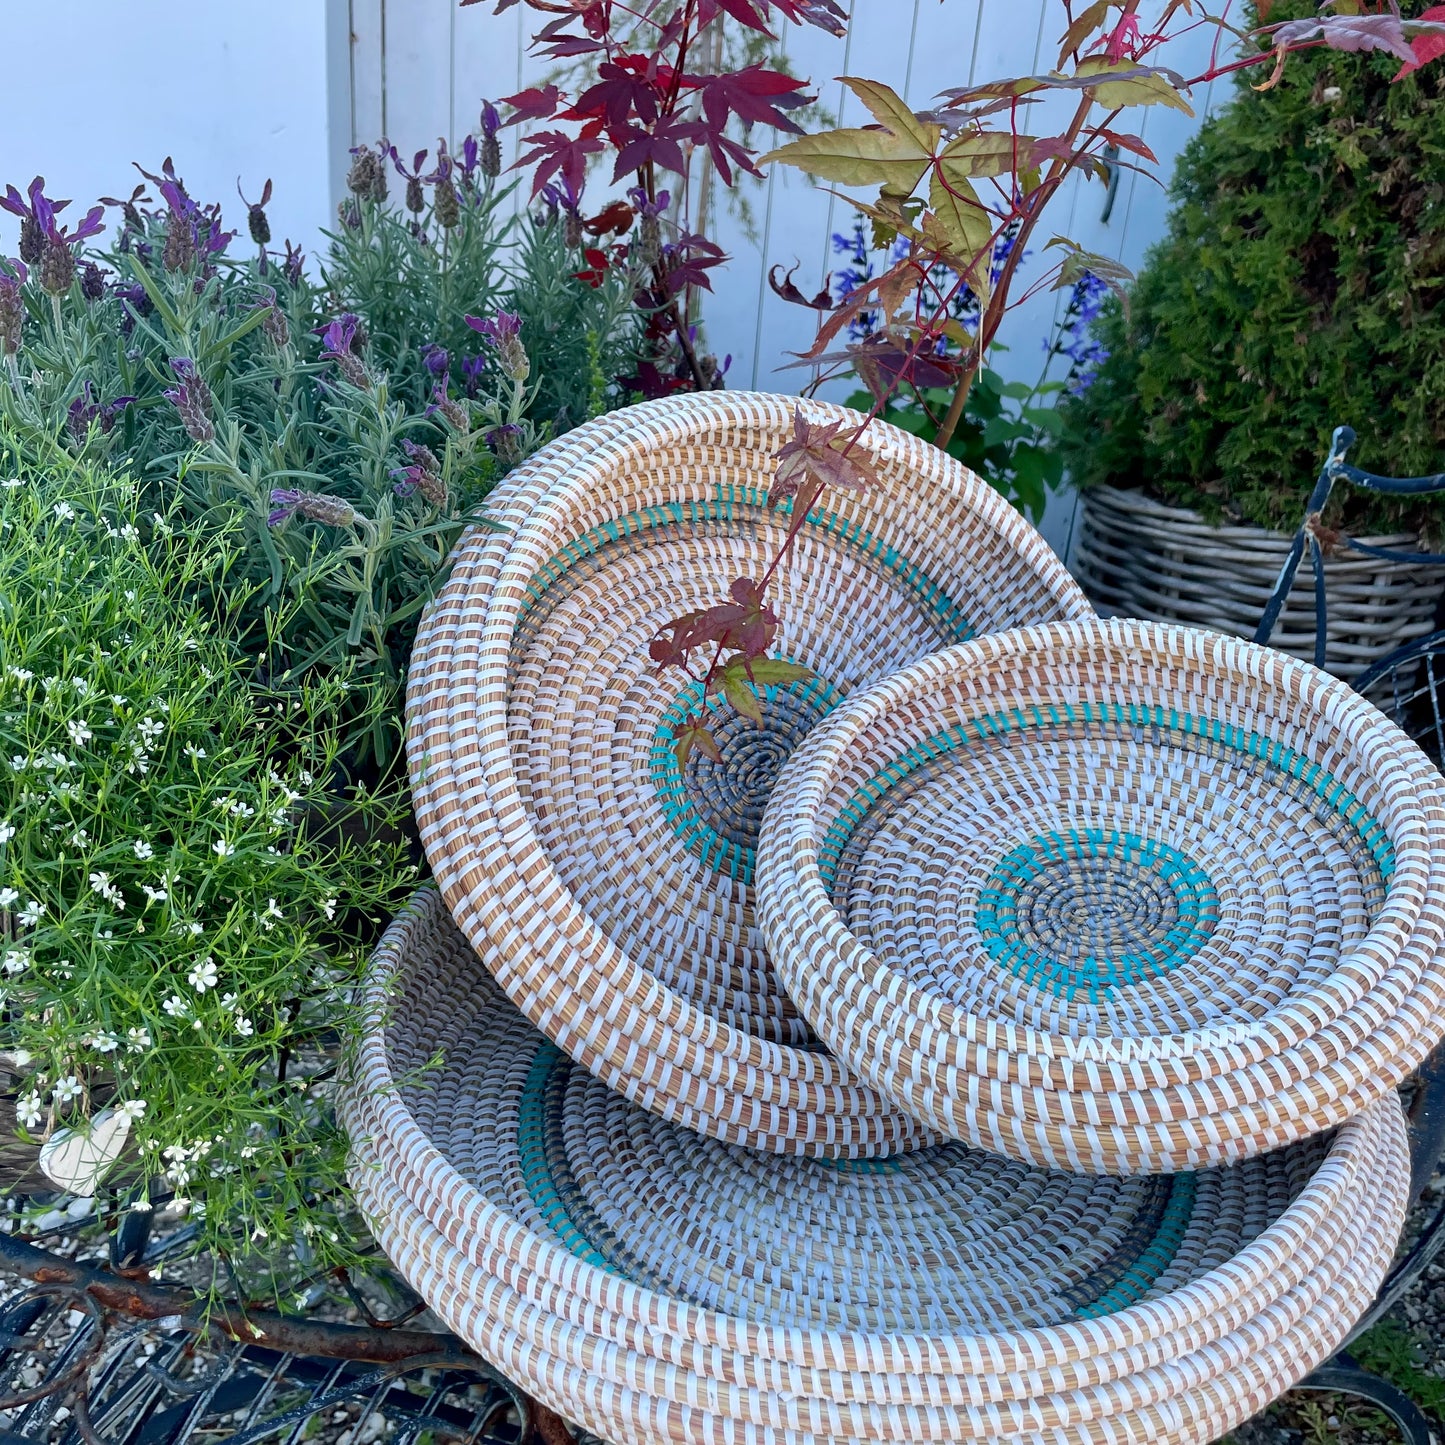 Bread basket / serving tray. Handwoven in elephant grass with recycled plastic thread. Three sizes. Turquoise. Fair Trade from Senegal